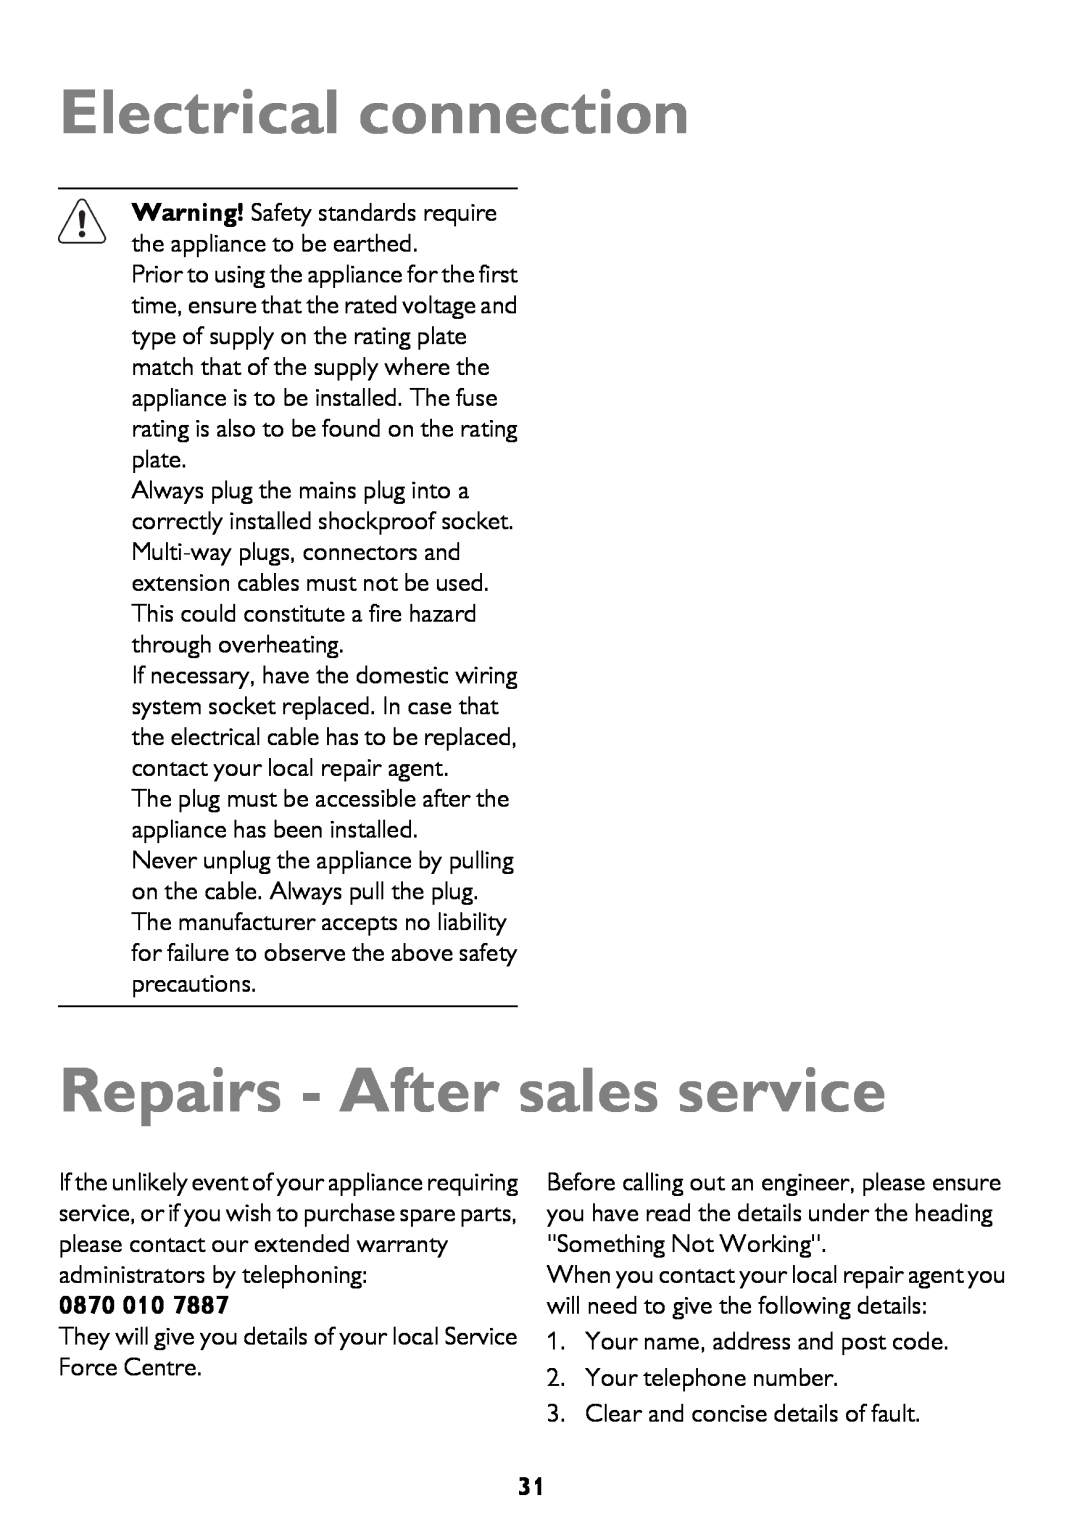 John Lewis JLDWS1208 instruction manual Electrical connection, Repairs - After sales service, 0870 